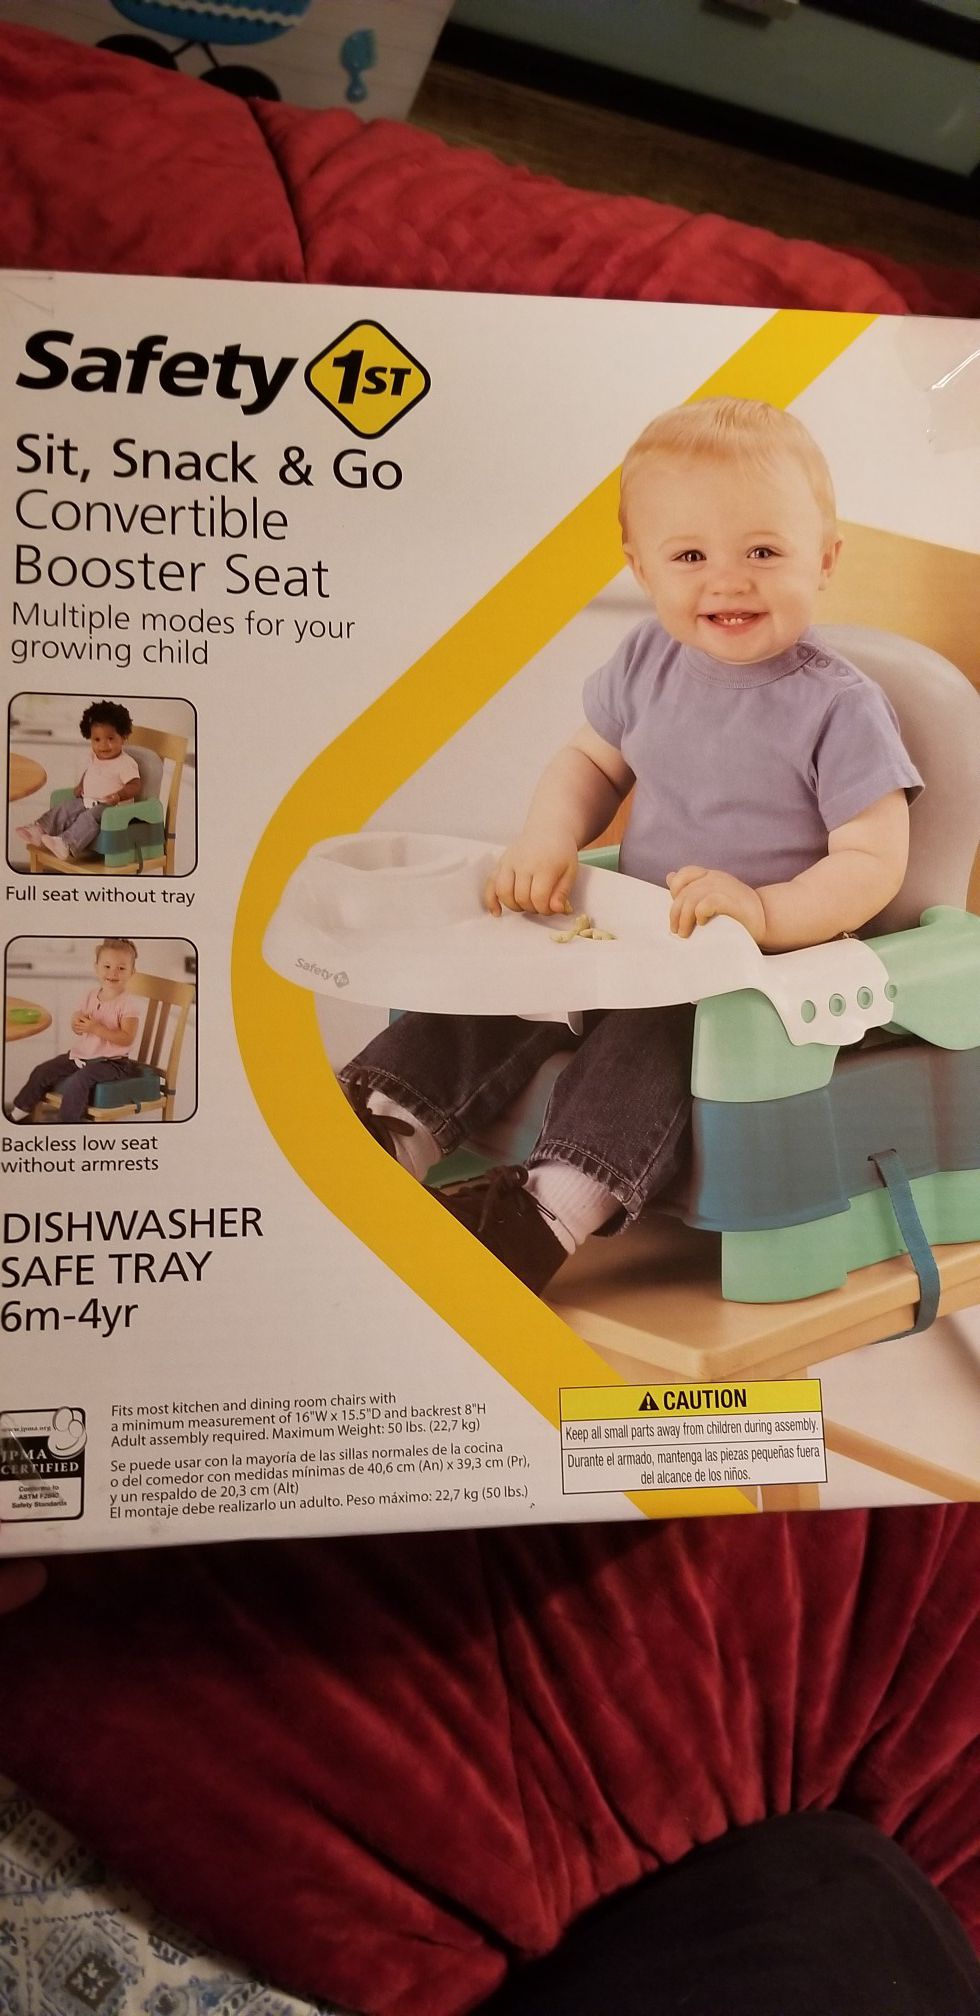 Safety 1st-sit, snack, and go booster seat